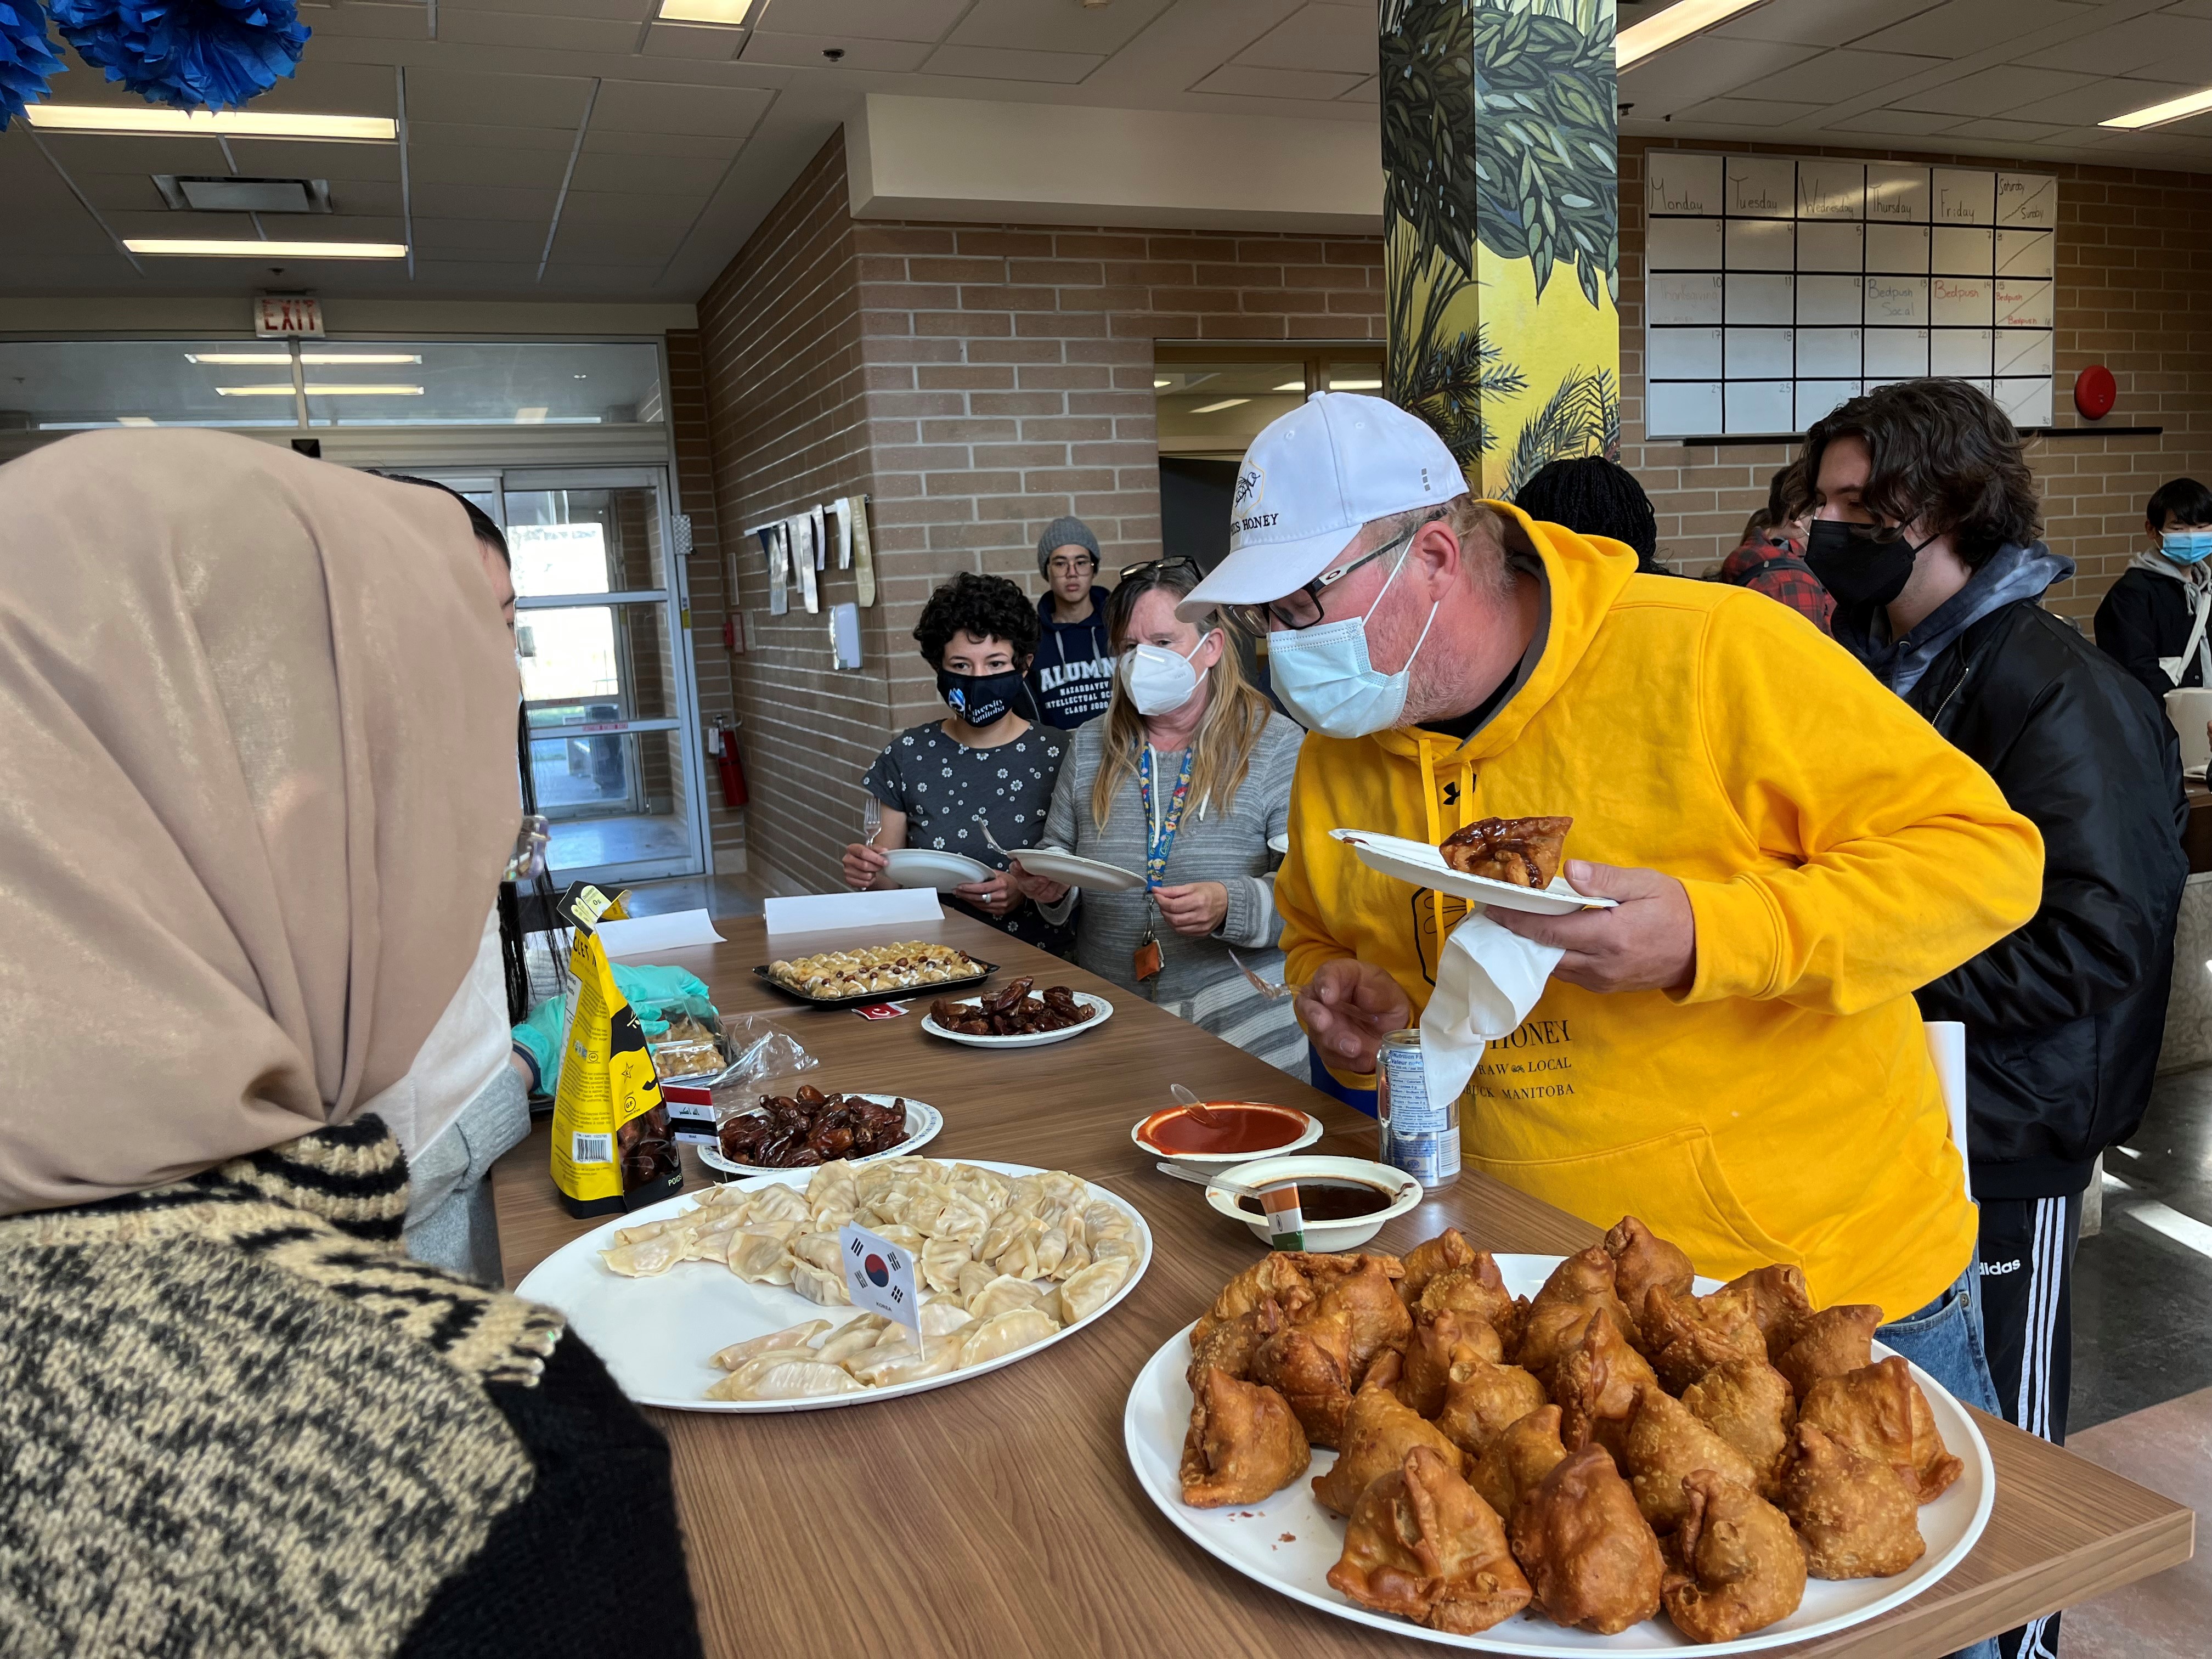 Students and staff enjoyed the food.